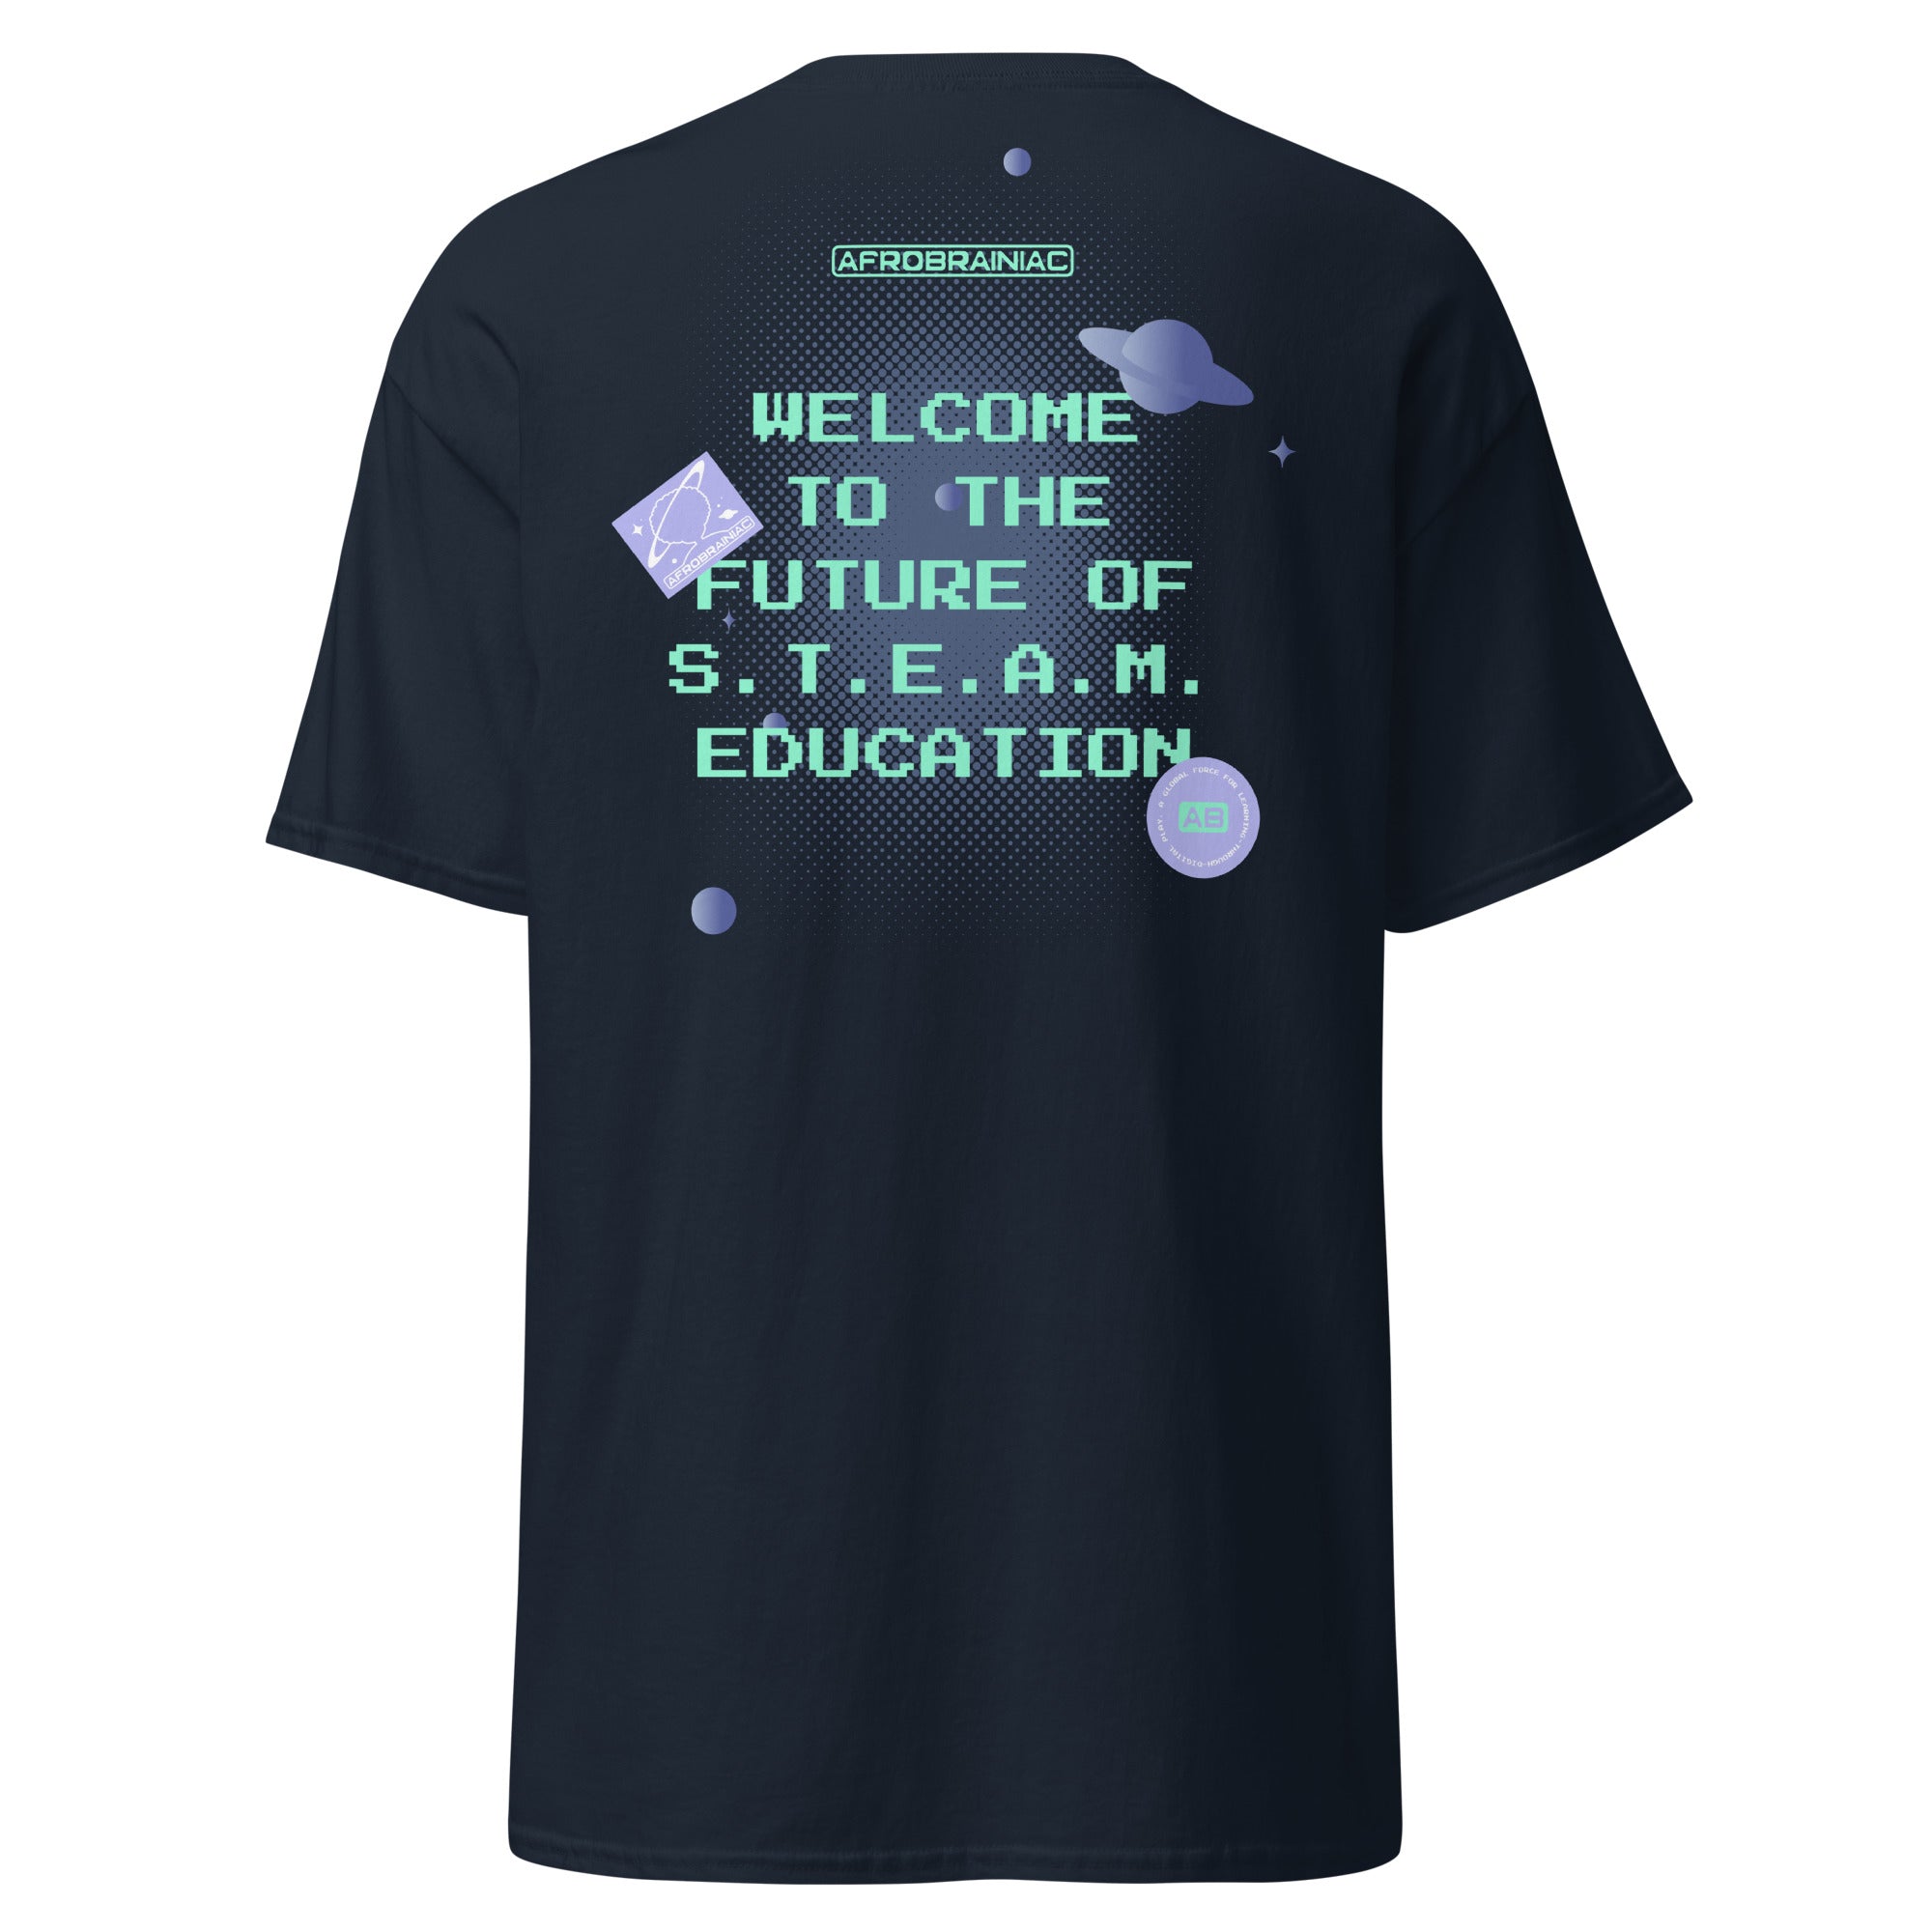 AB "Welcome to Future" Unisex Adult T-Shirt - LIMITED